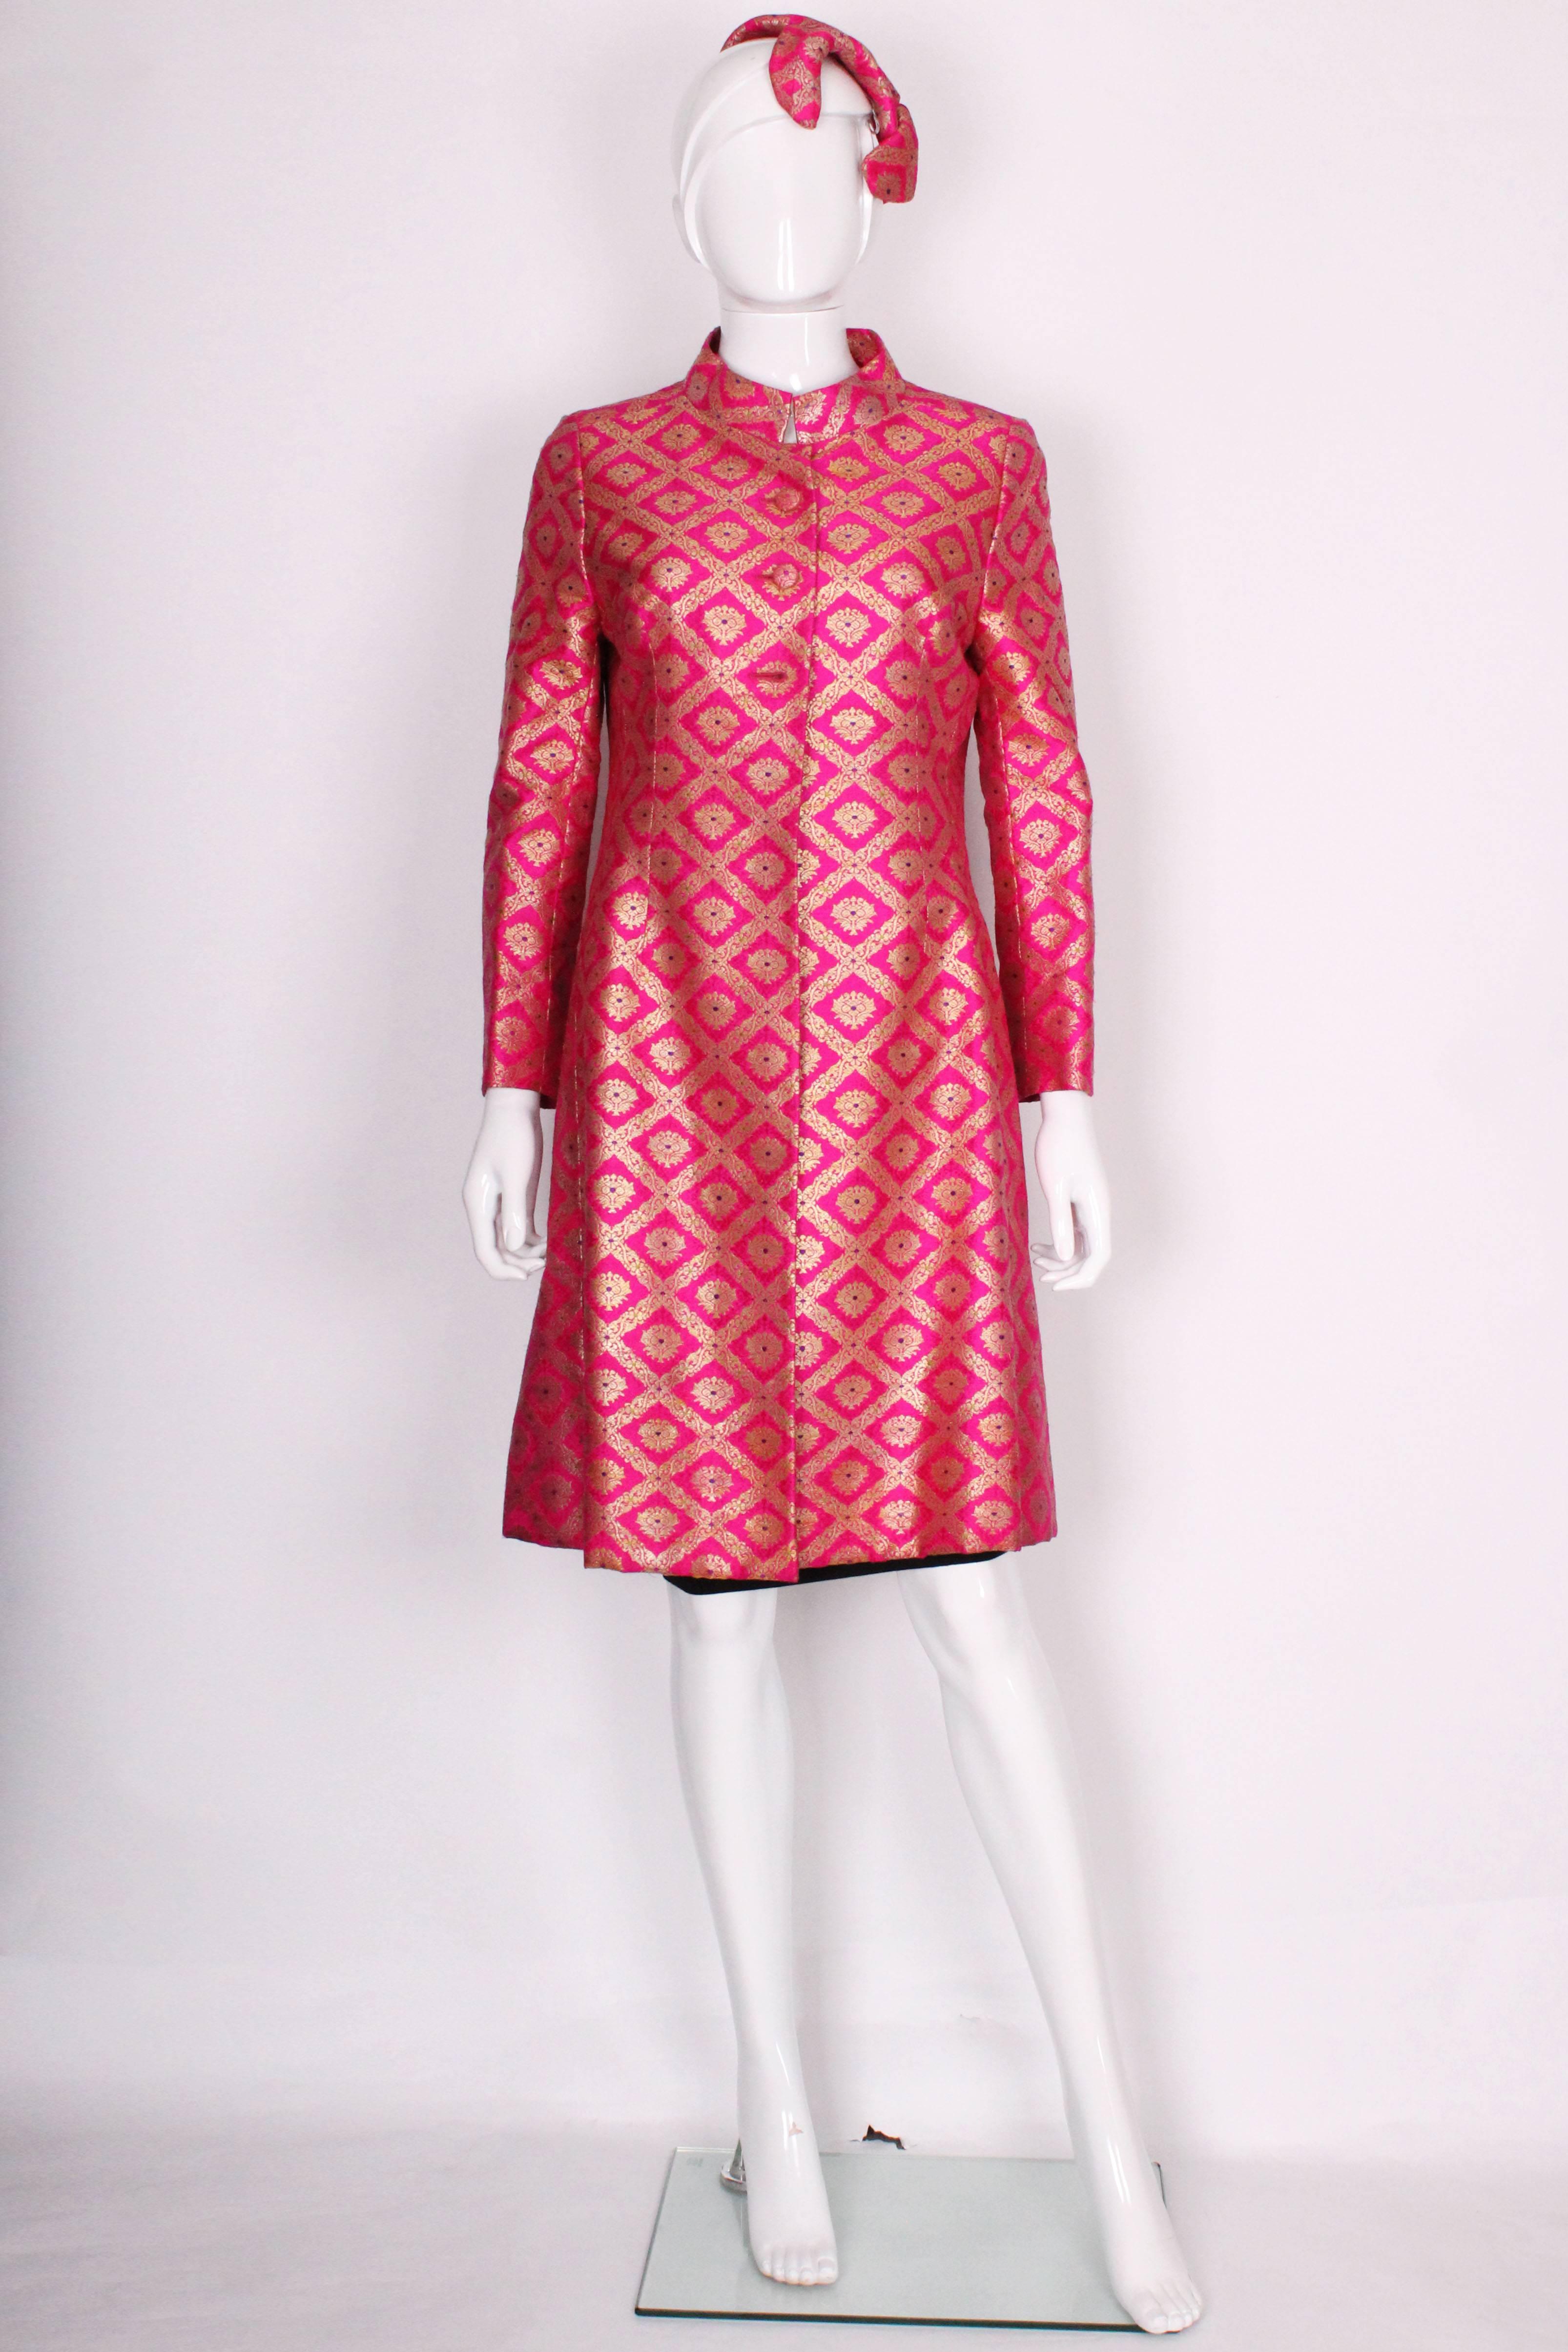 A stunning silk coat in a bright pink with gold jaquard detail and small flecks of other colours. The silk lining is a rich, bright purple which sets off the fabric of the coat beautifully. There is a manderine style, stand up collar, and 3 large